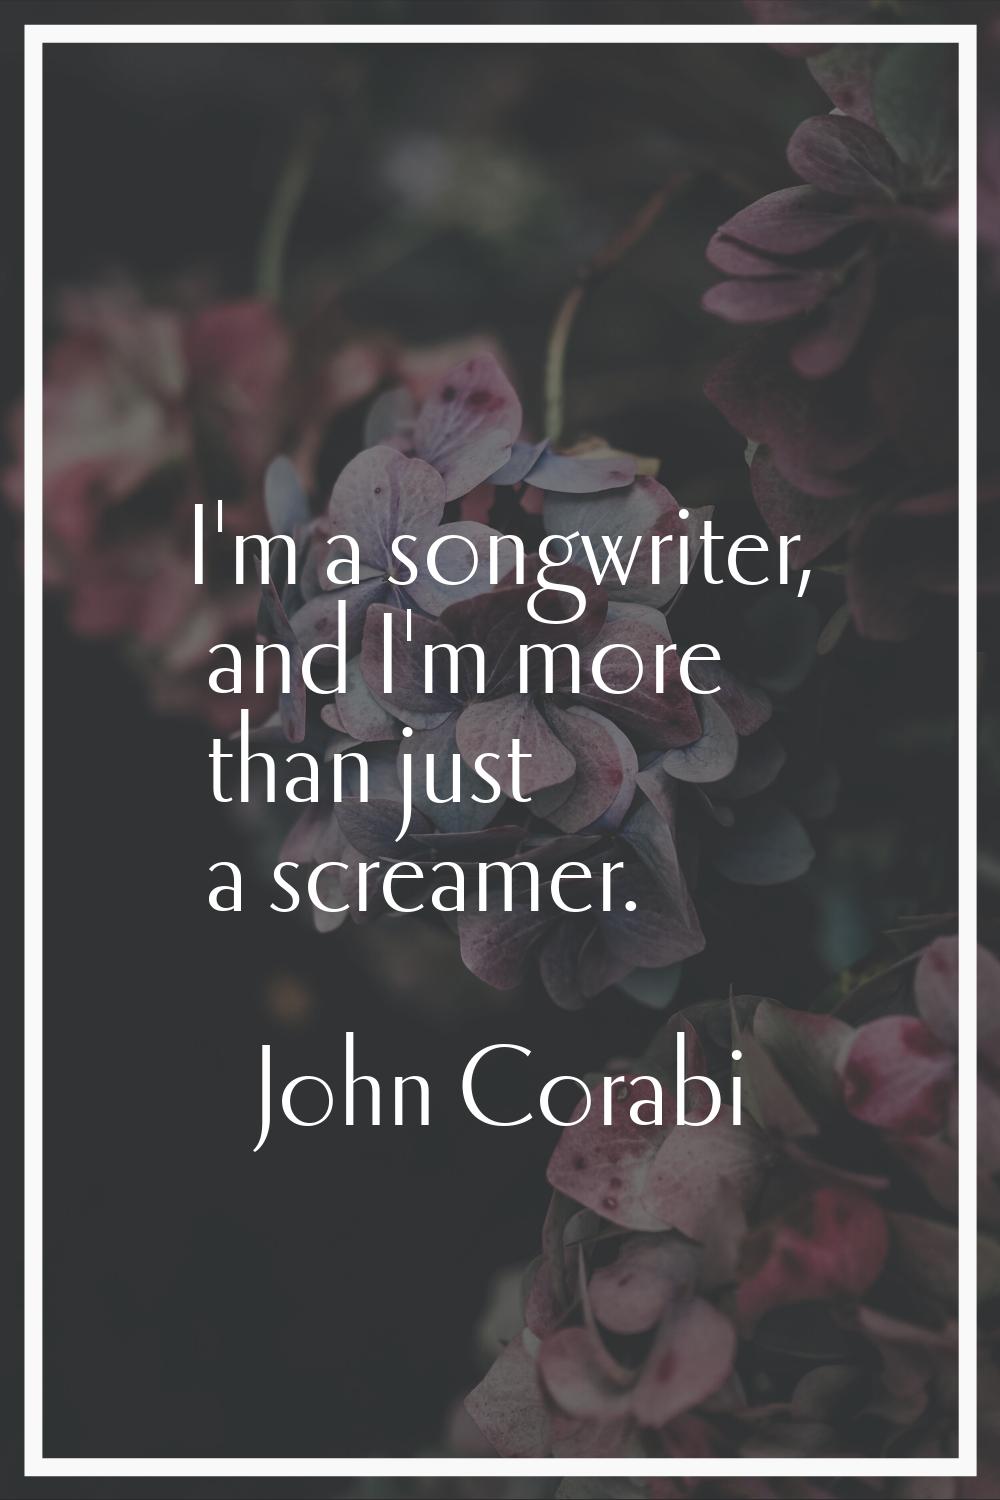 I'm a songwriter, and I'm more than just a screamer.